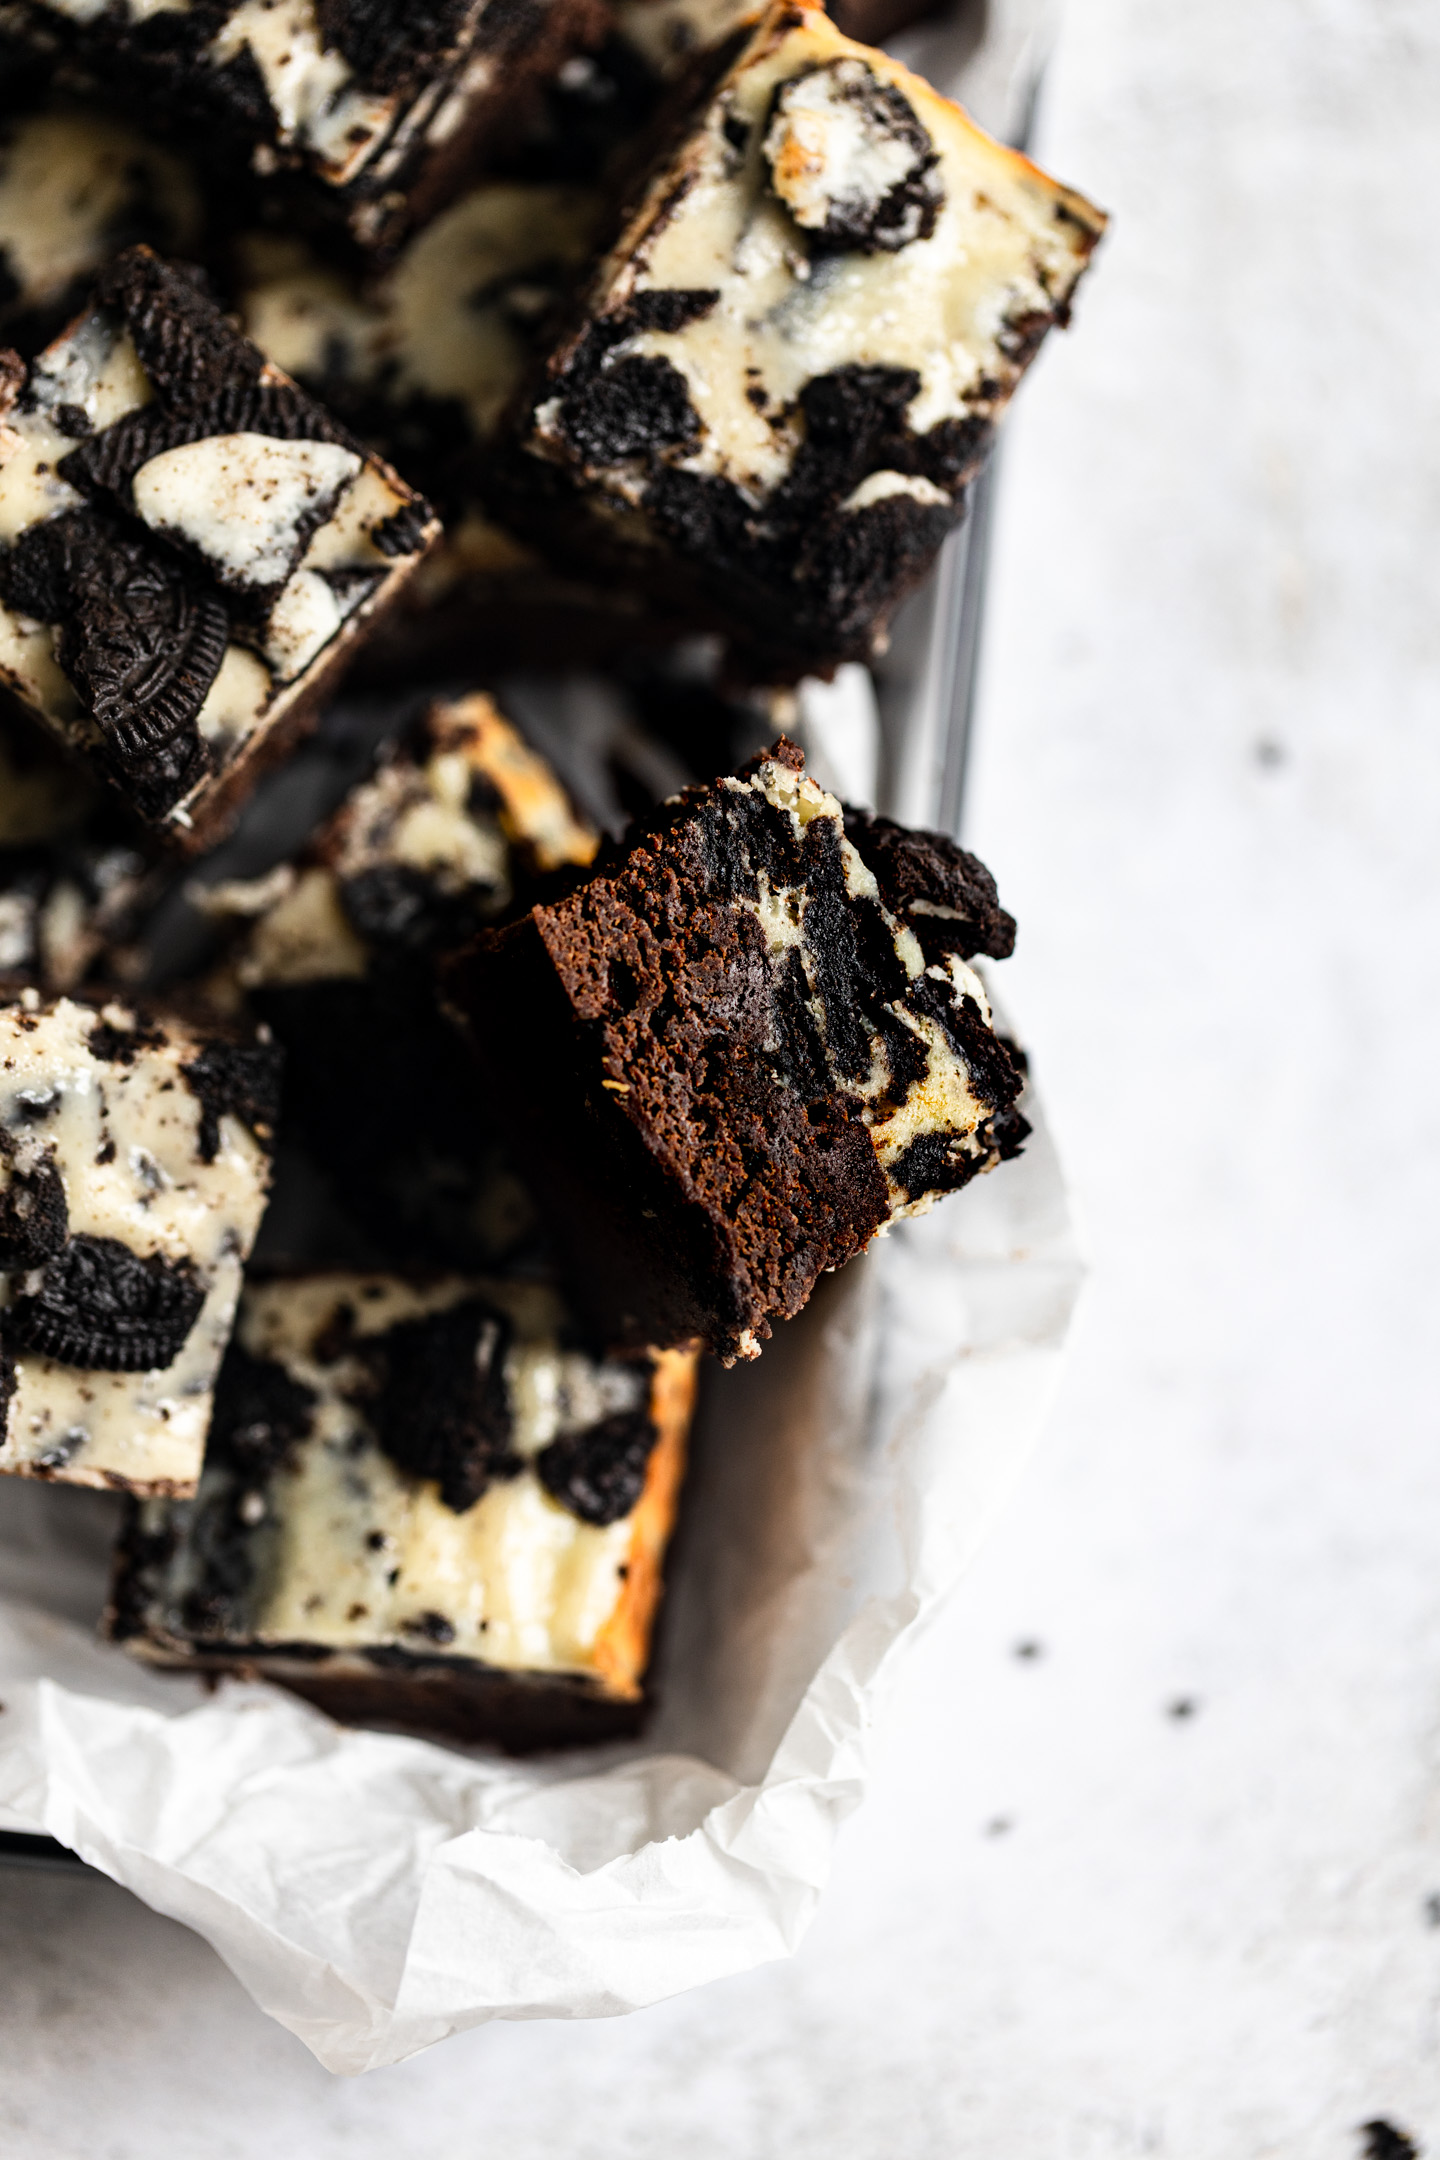 A Oreo Cheesecake brownie on its side next to other brownies in a tin.